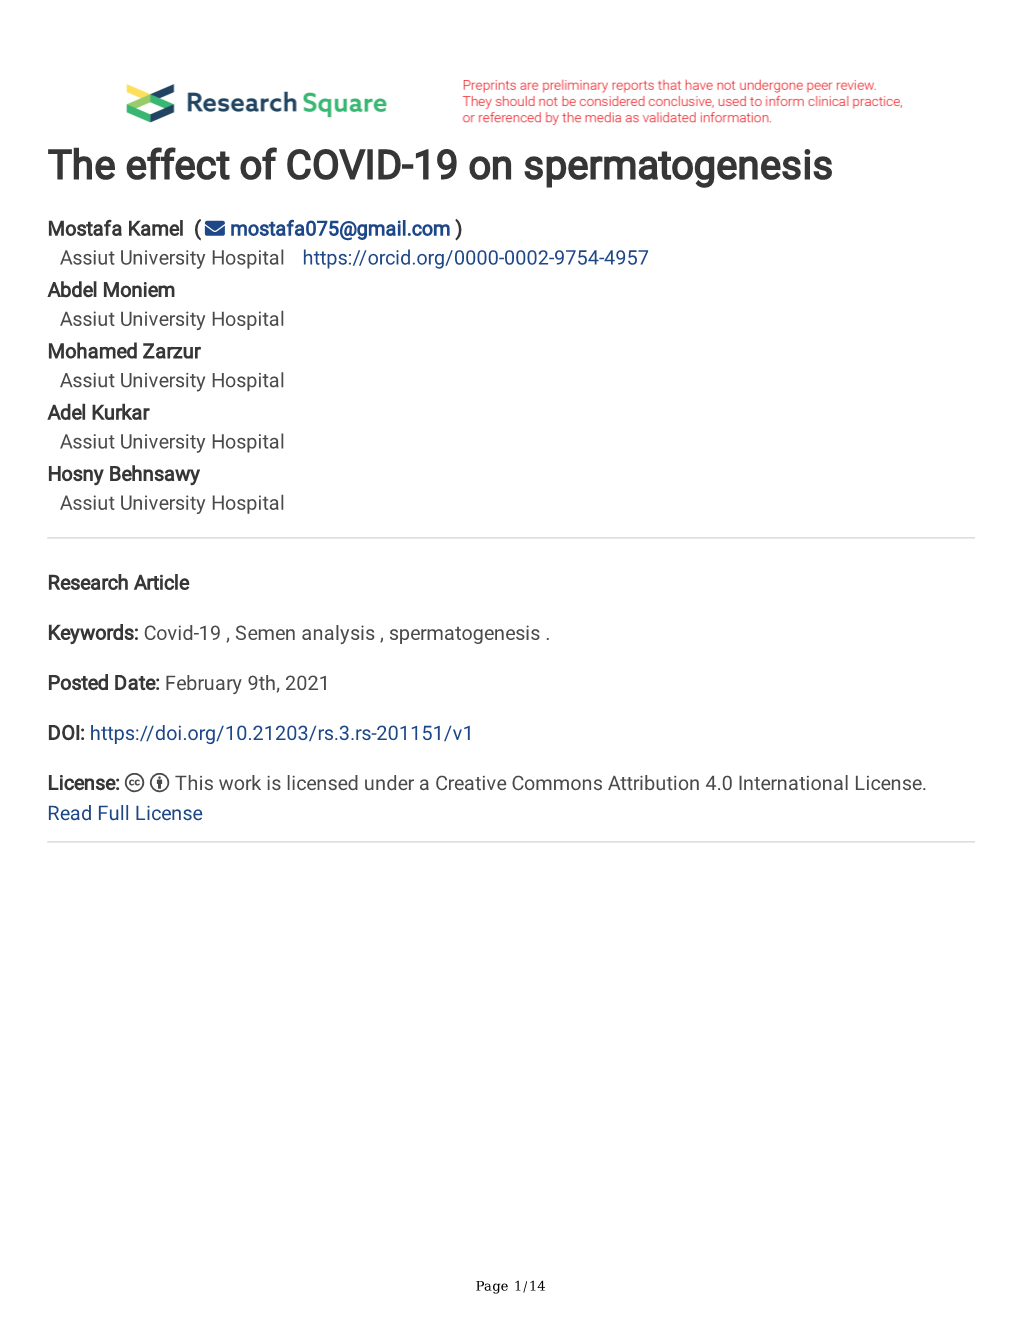 The Effect of COVID-19 on Spermatogenesis